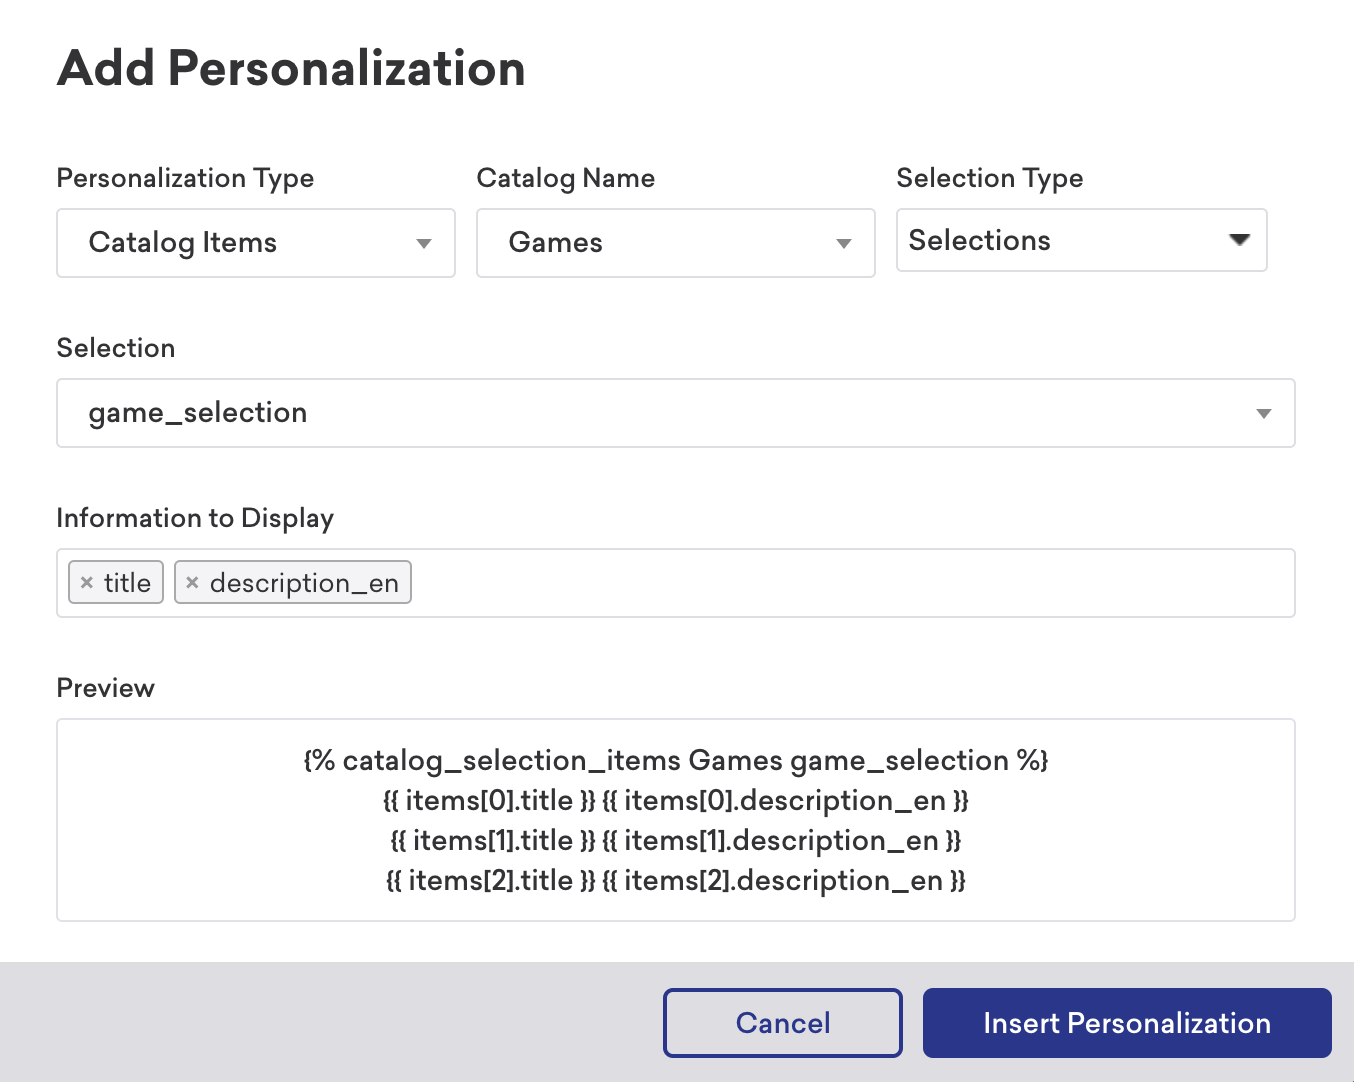 The Add Personalization modal with the following selections: "Catalog Items" for "Personalization Type", "Games" for "Catalog Name", "Selections" for "Selection Type", "game_selection" for "Selection", and "title" and "description_en" for "Information to Display".